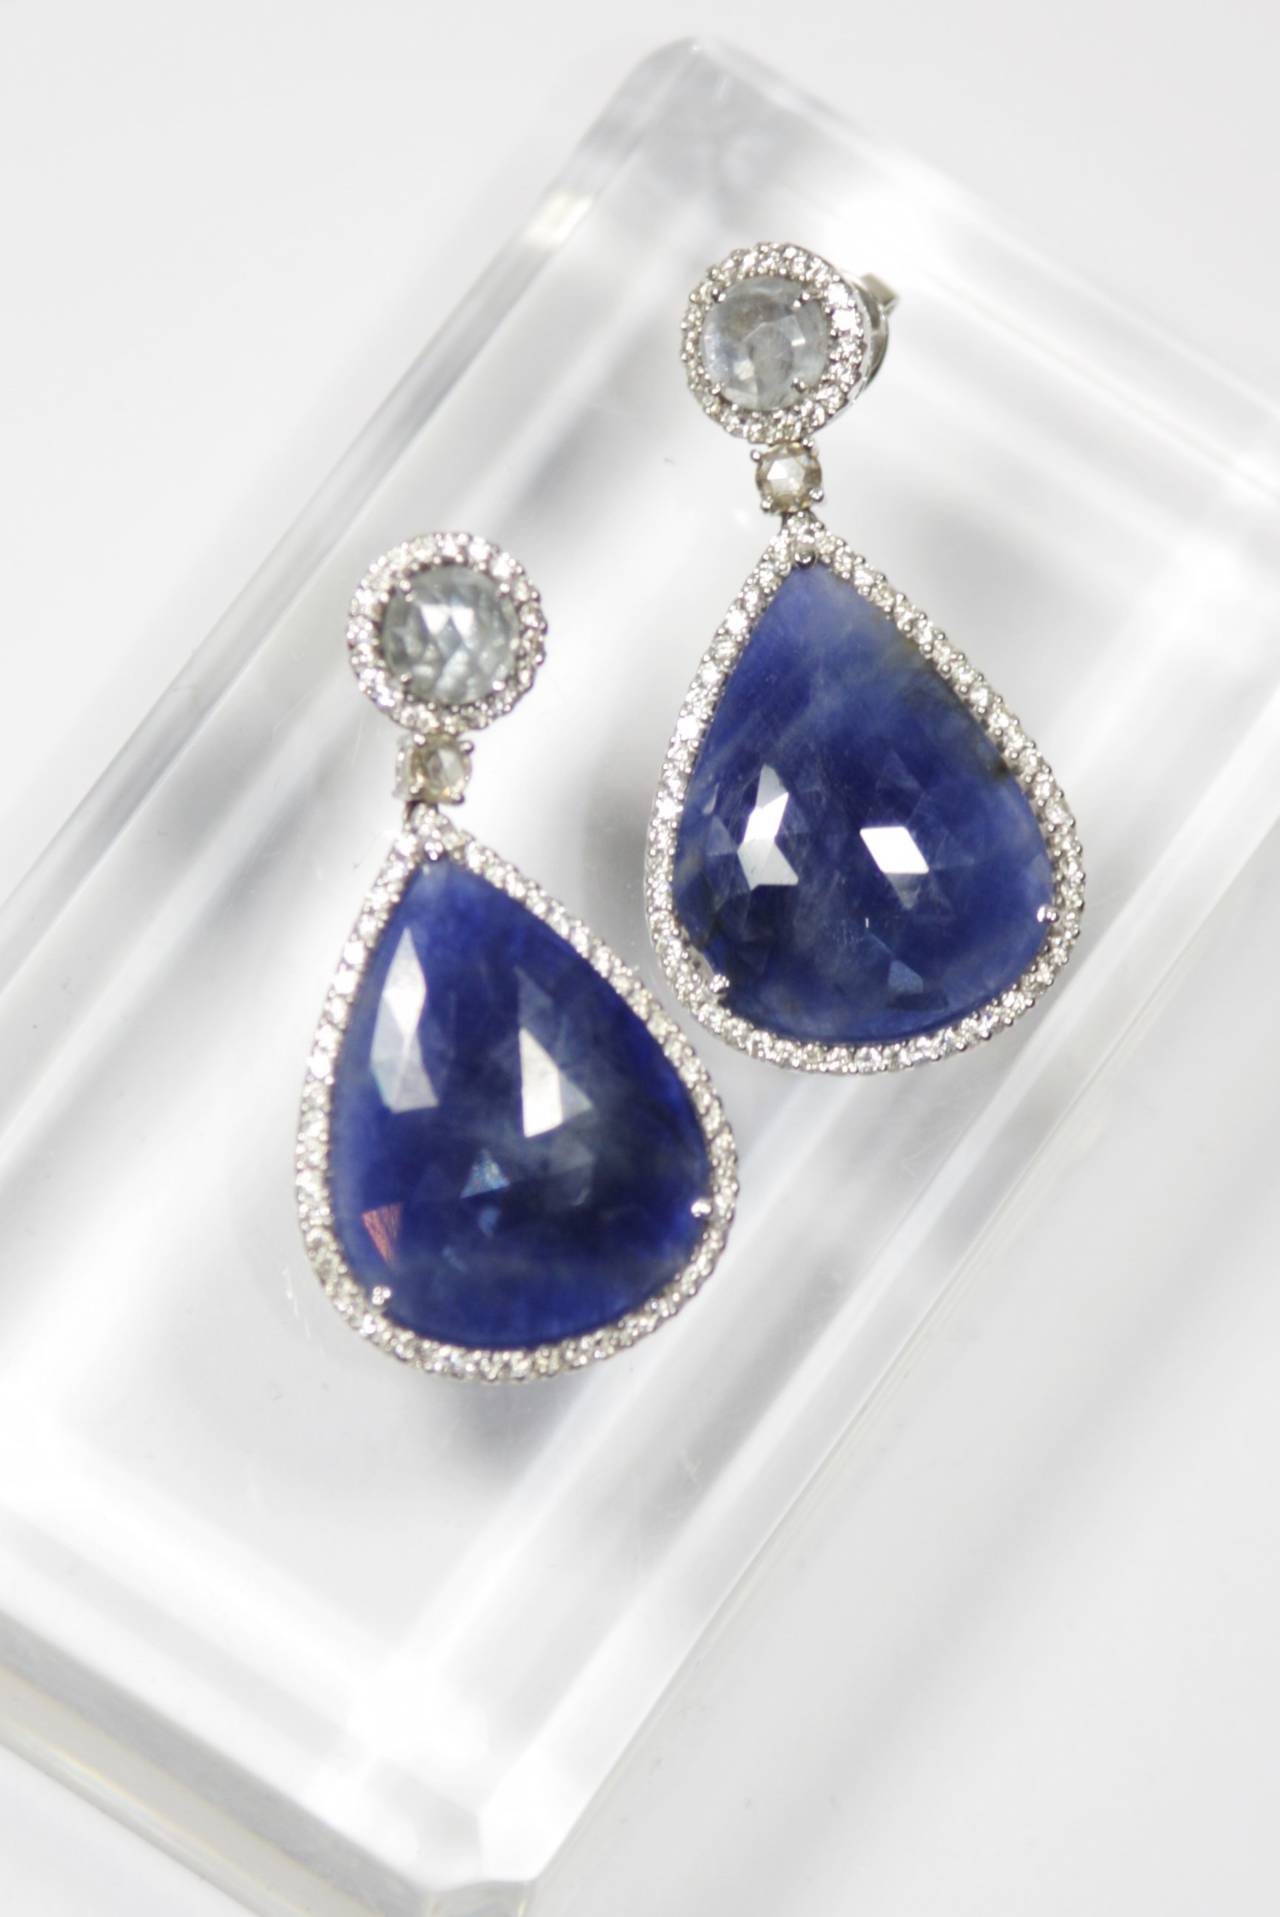 These 18kt White Gold, Diamond, and Sapphire  earrings are available through The Paper Bag Princess of Beverly Hills. Please feel free to contact us with any inquiries you may have. We also consign.

Specs: 
18 KT White Gold 
Sapphire: 38.03